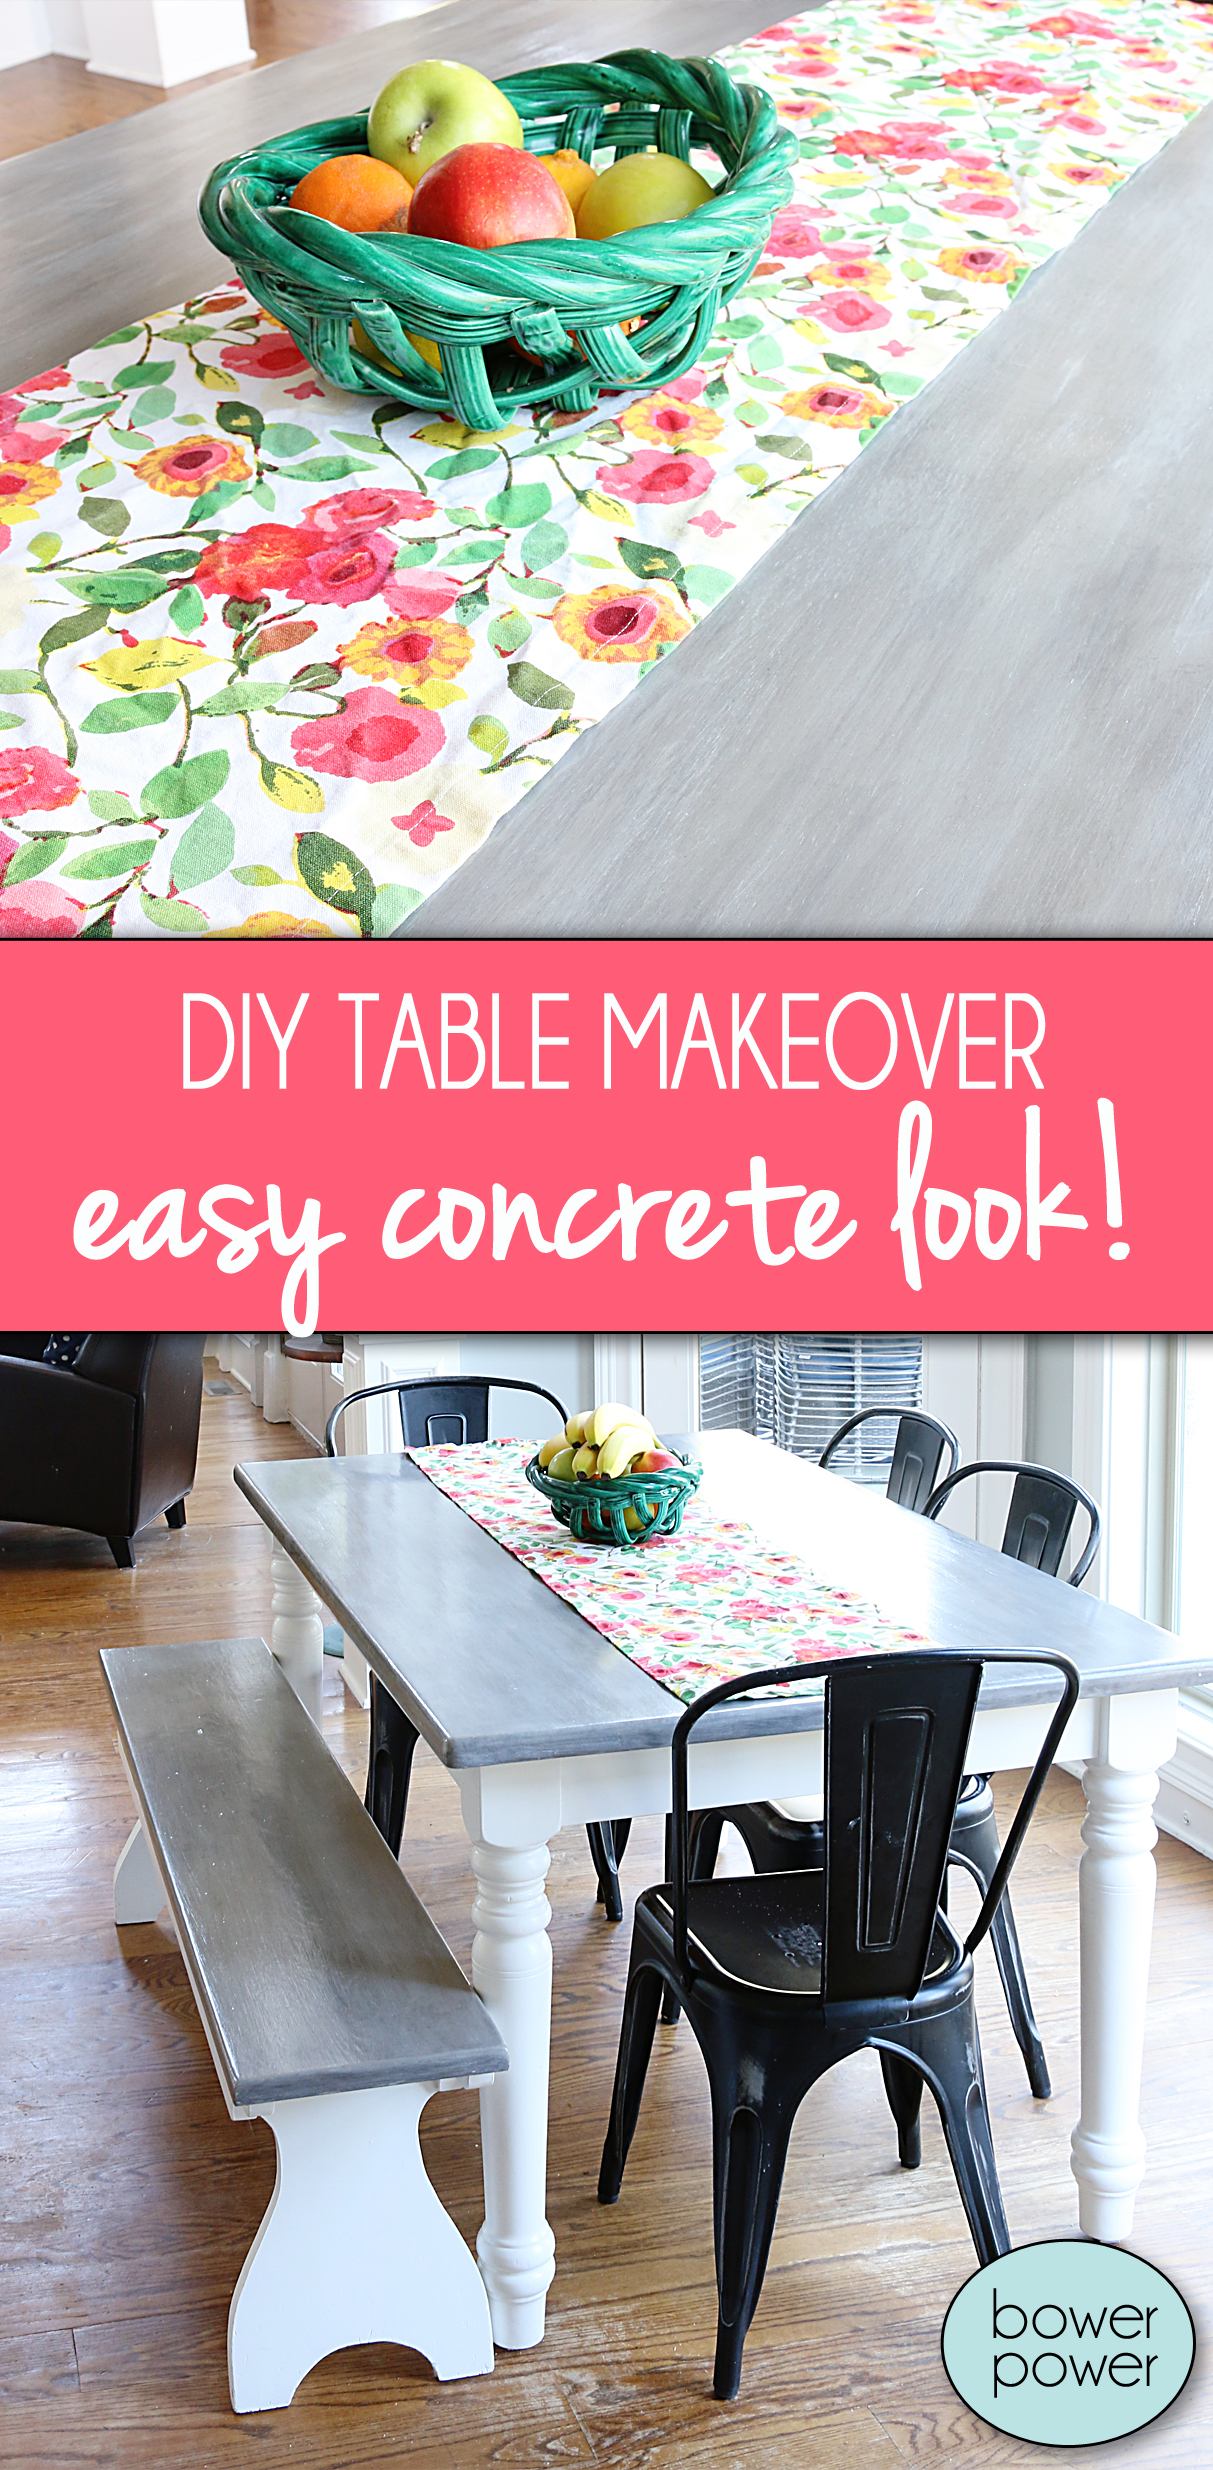 DIY Table Makeover - concrete look finish @bowerpowerblog